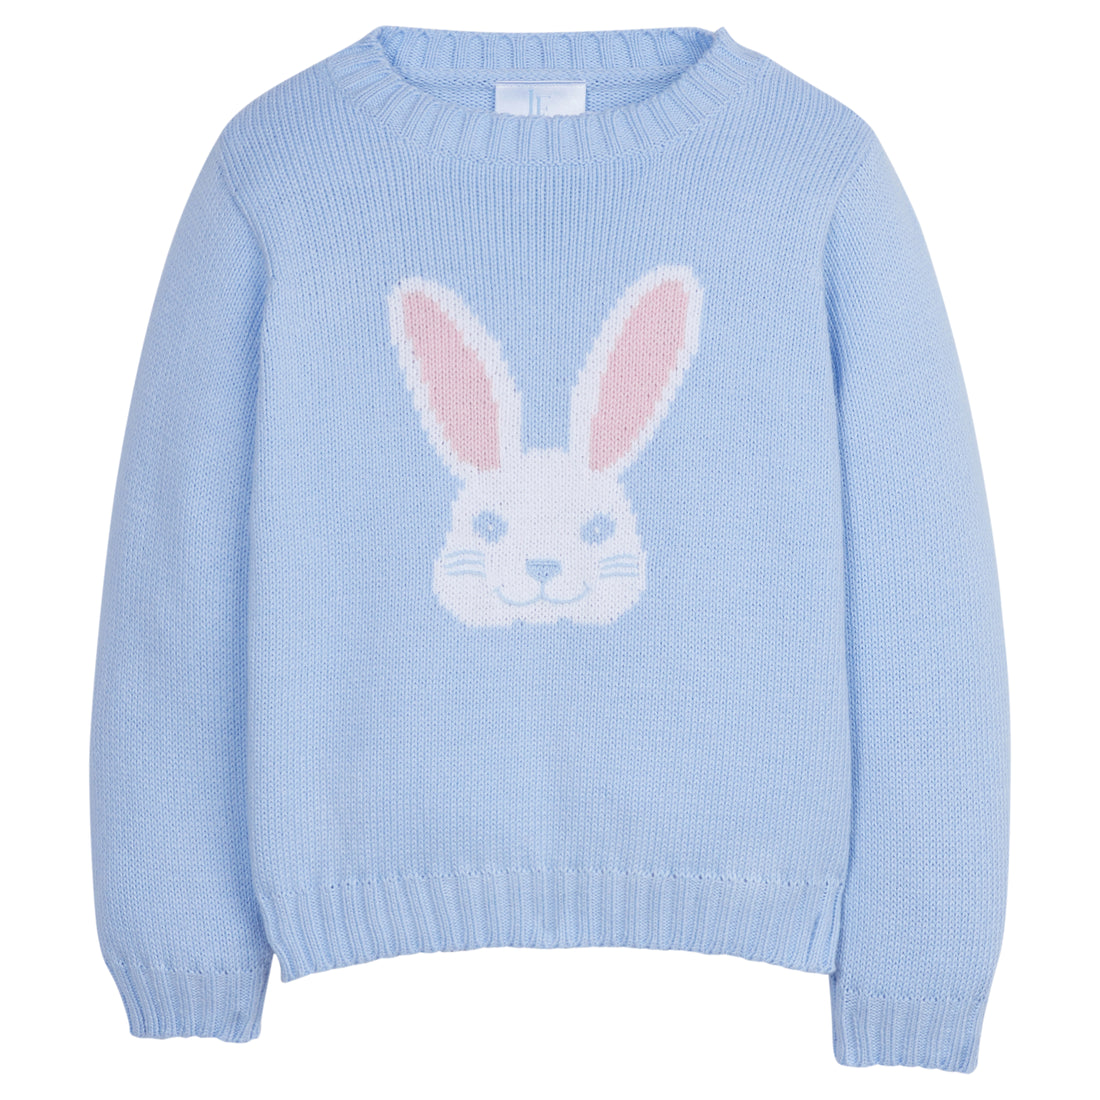 Little English classic intarsia sweater, light blue with white bunny with pink ears, traditional children&